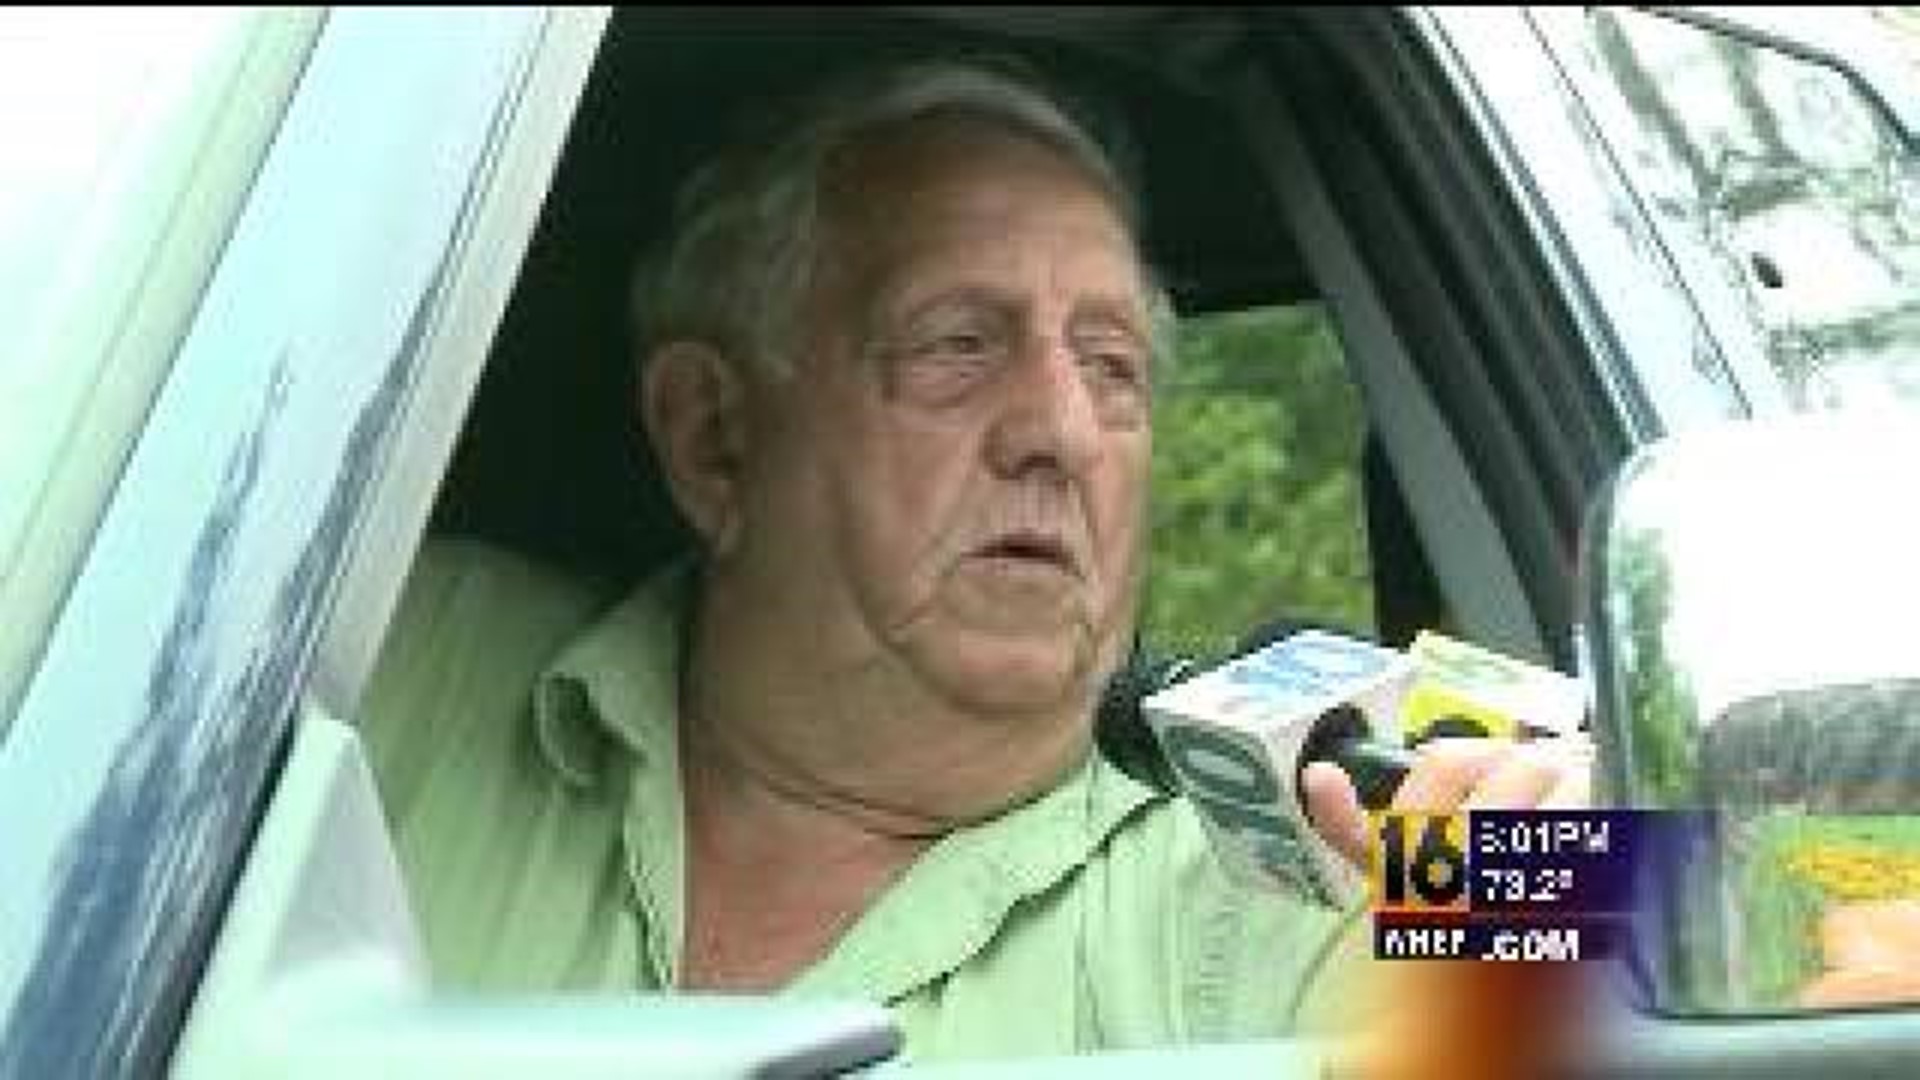 Father Of Accused Gunman Speaks